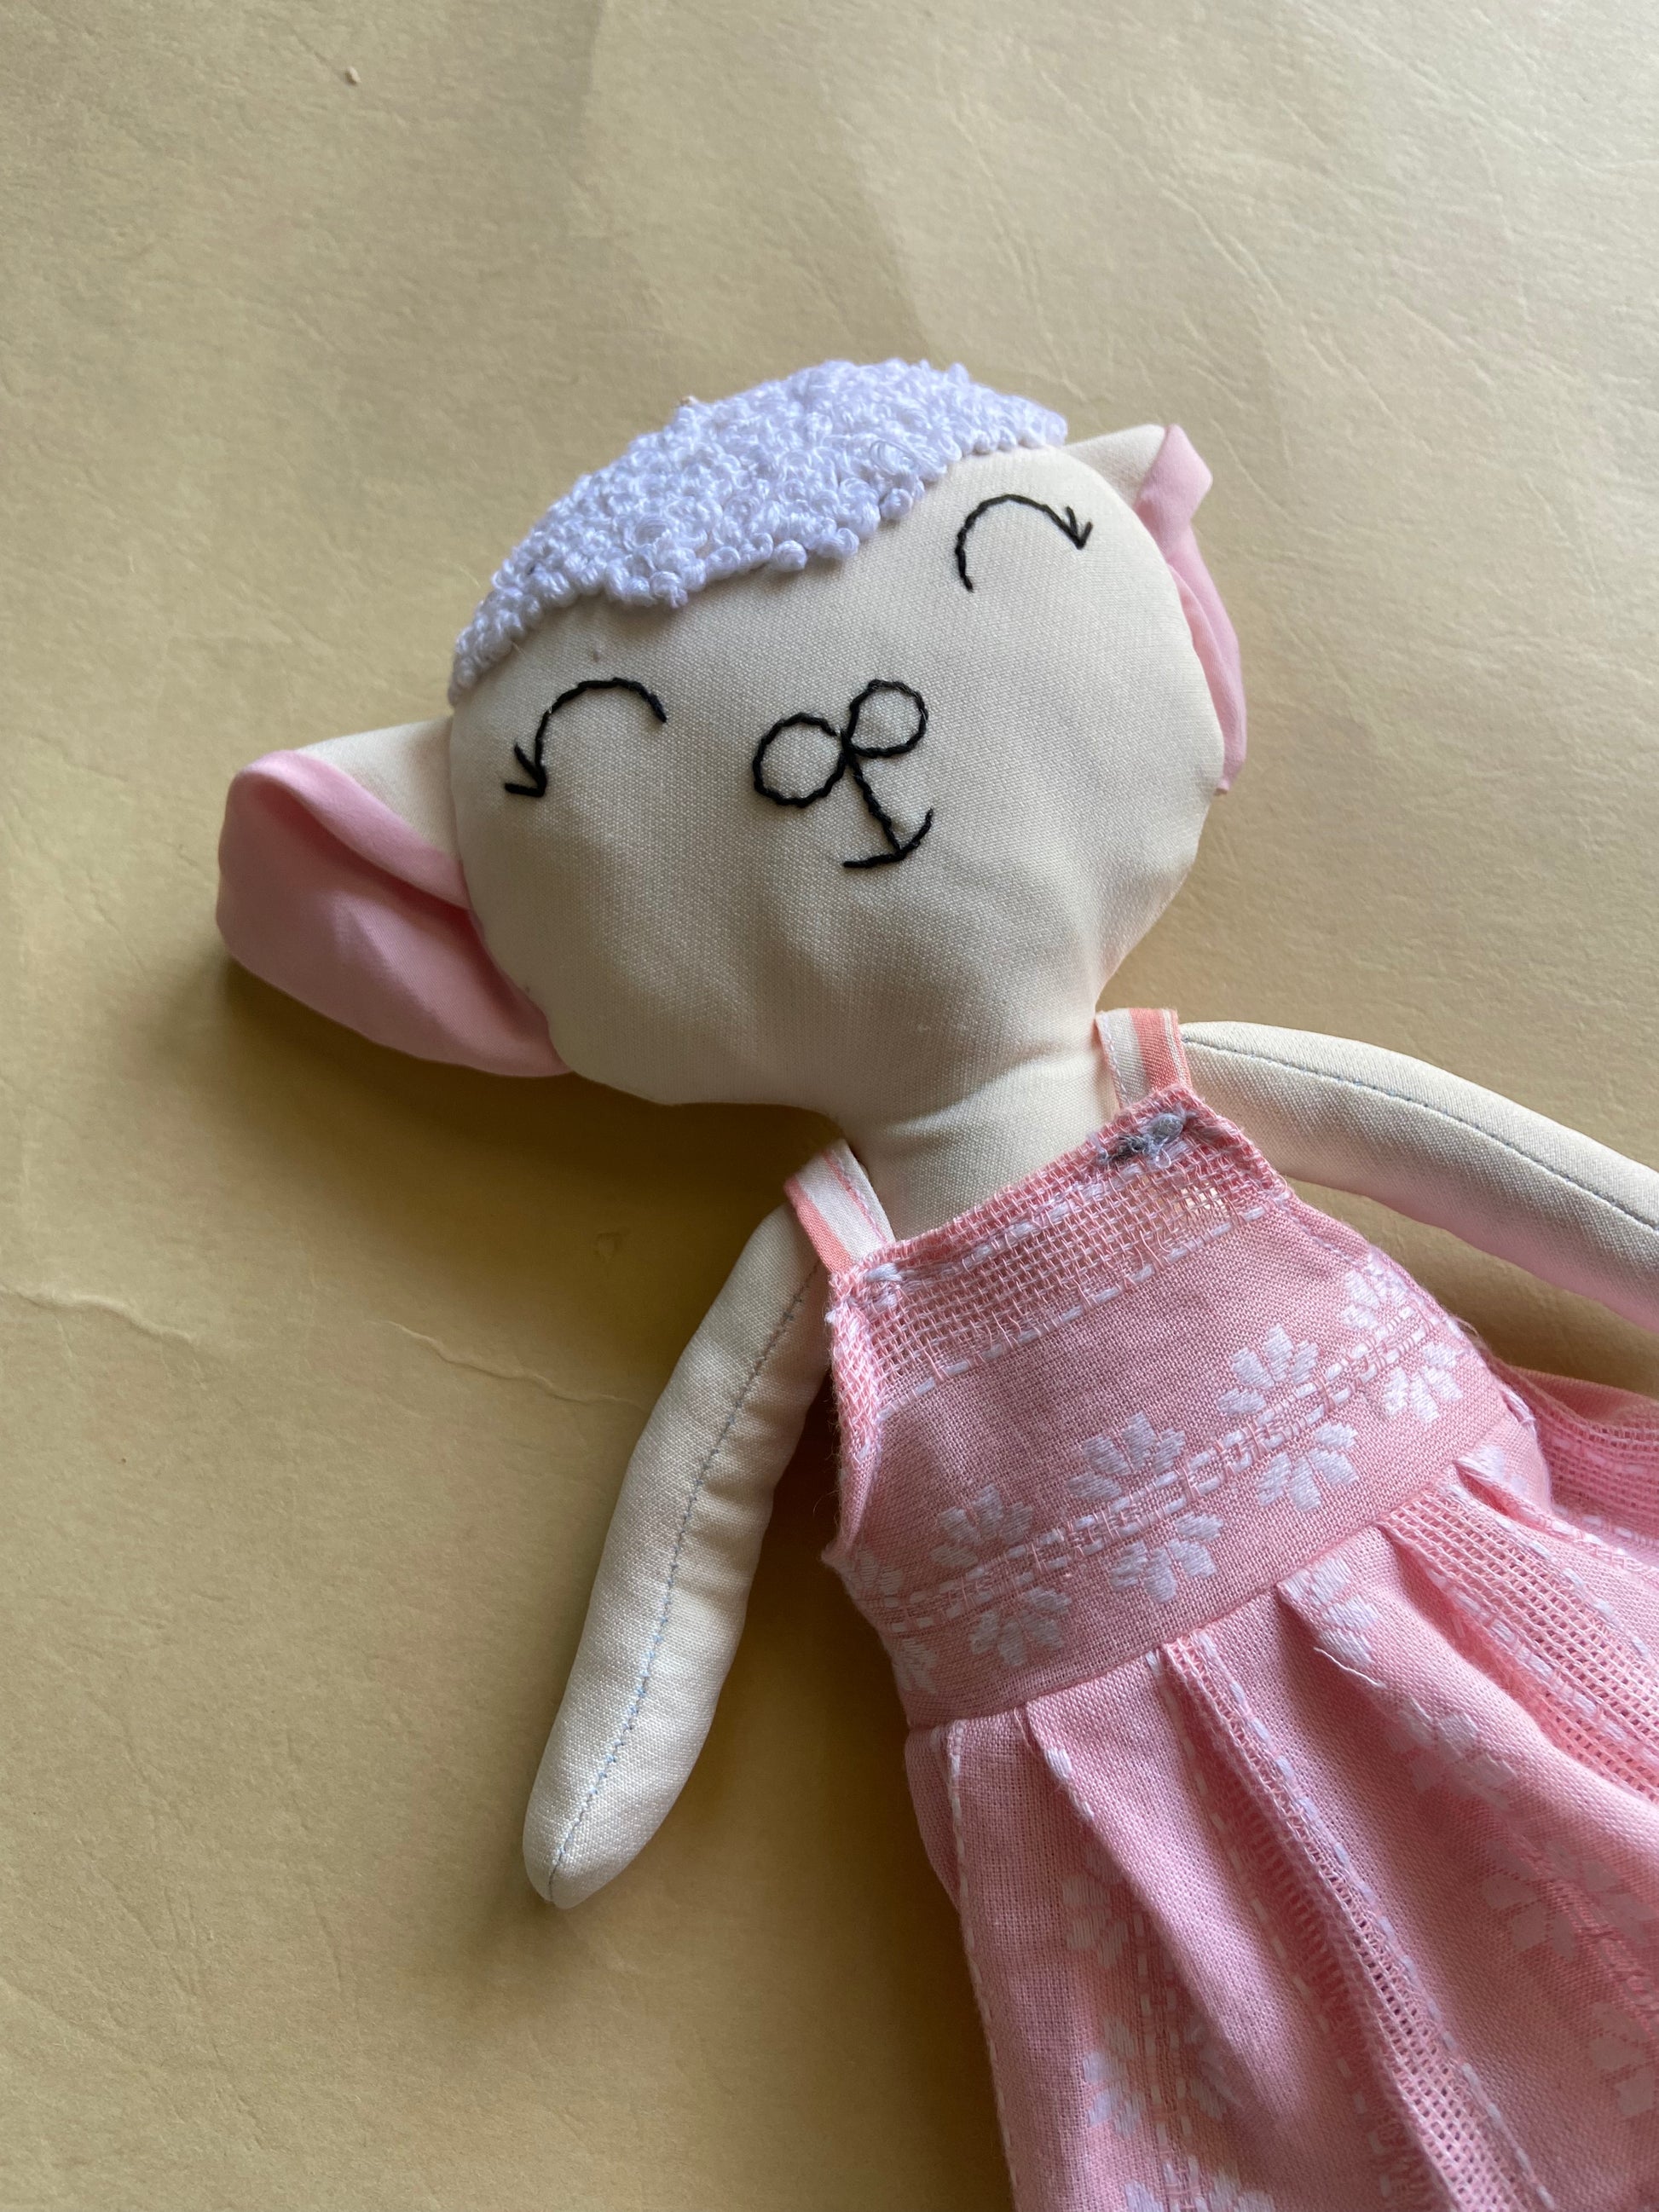 sheep-stuffed-toy-upcycled-and-handmade-pink-doll-close-up